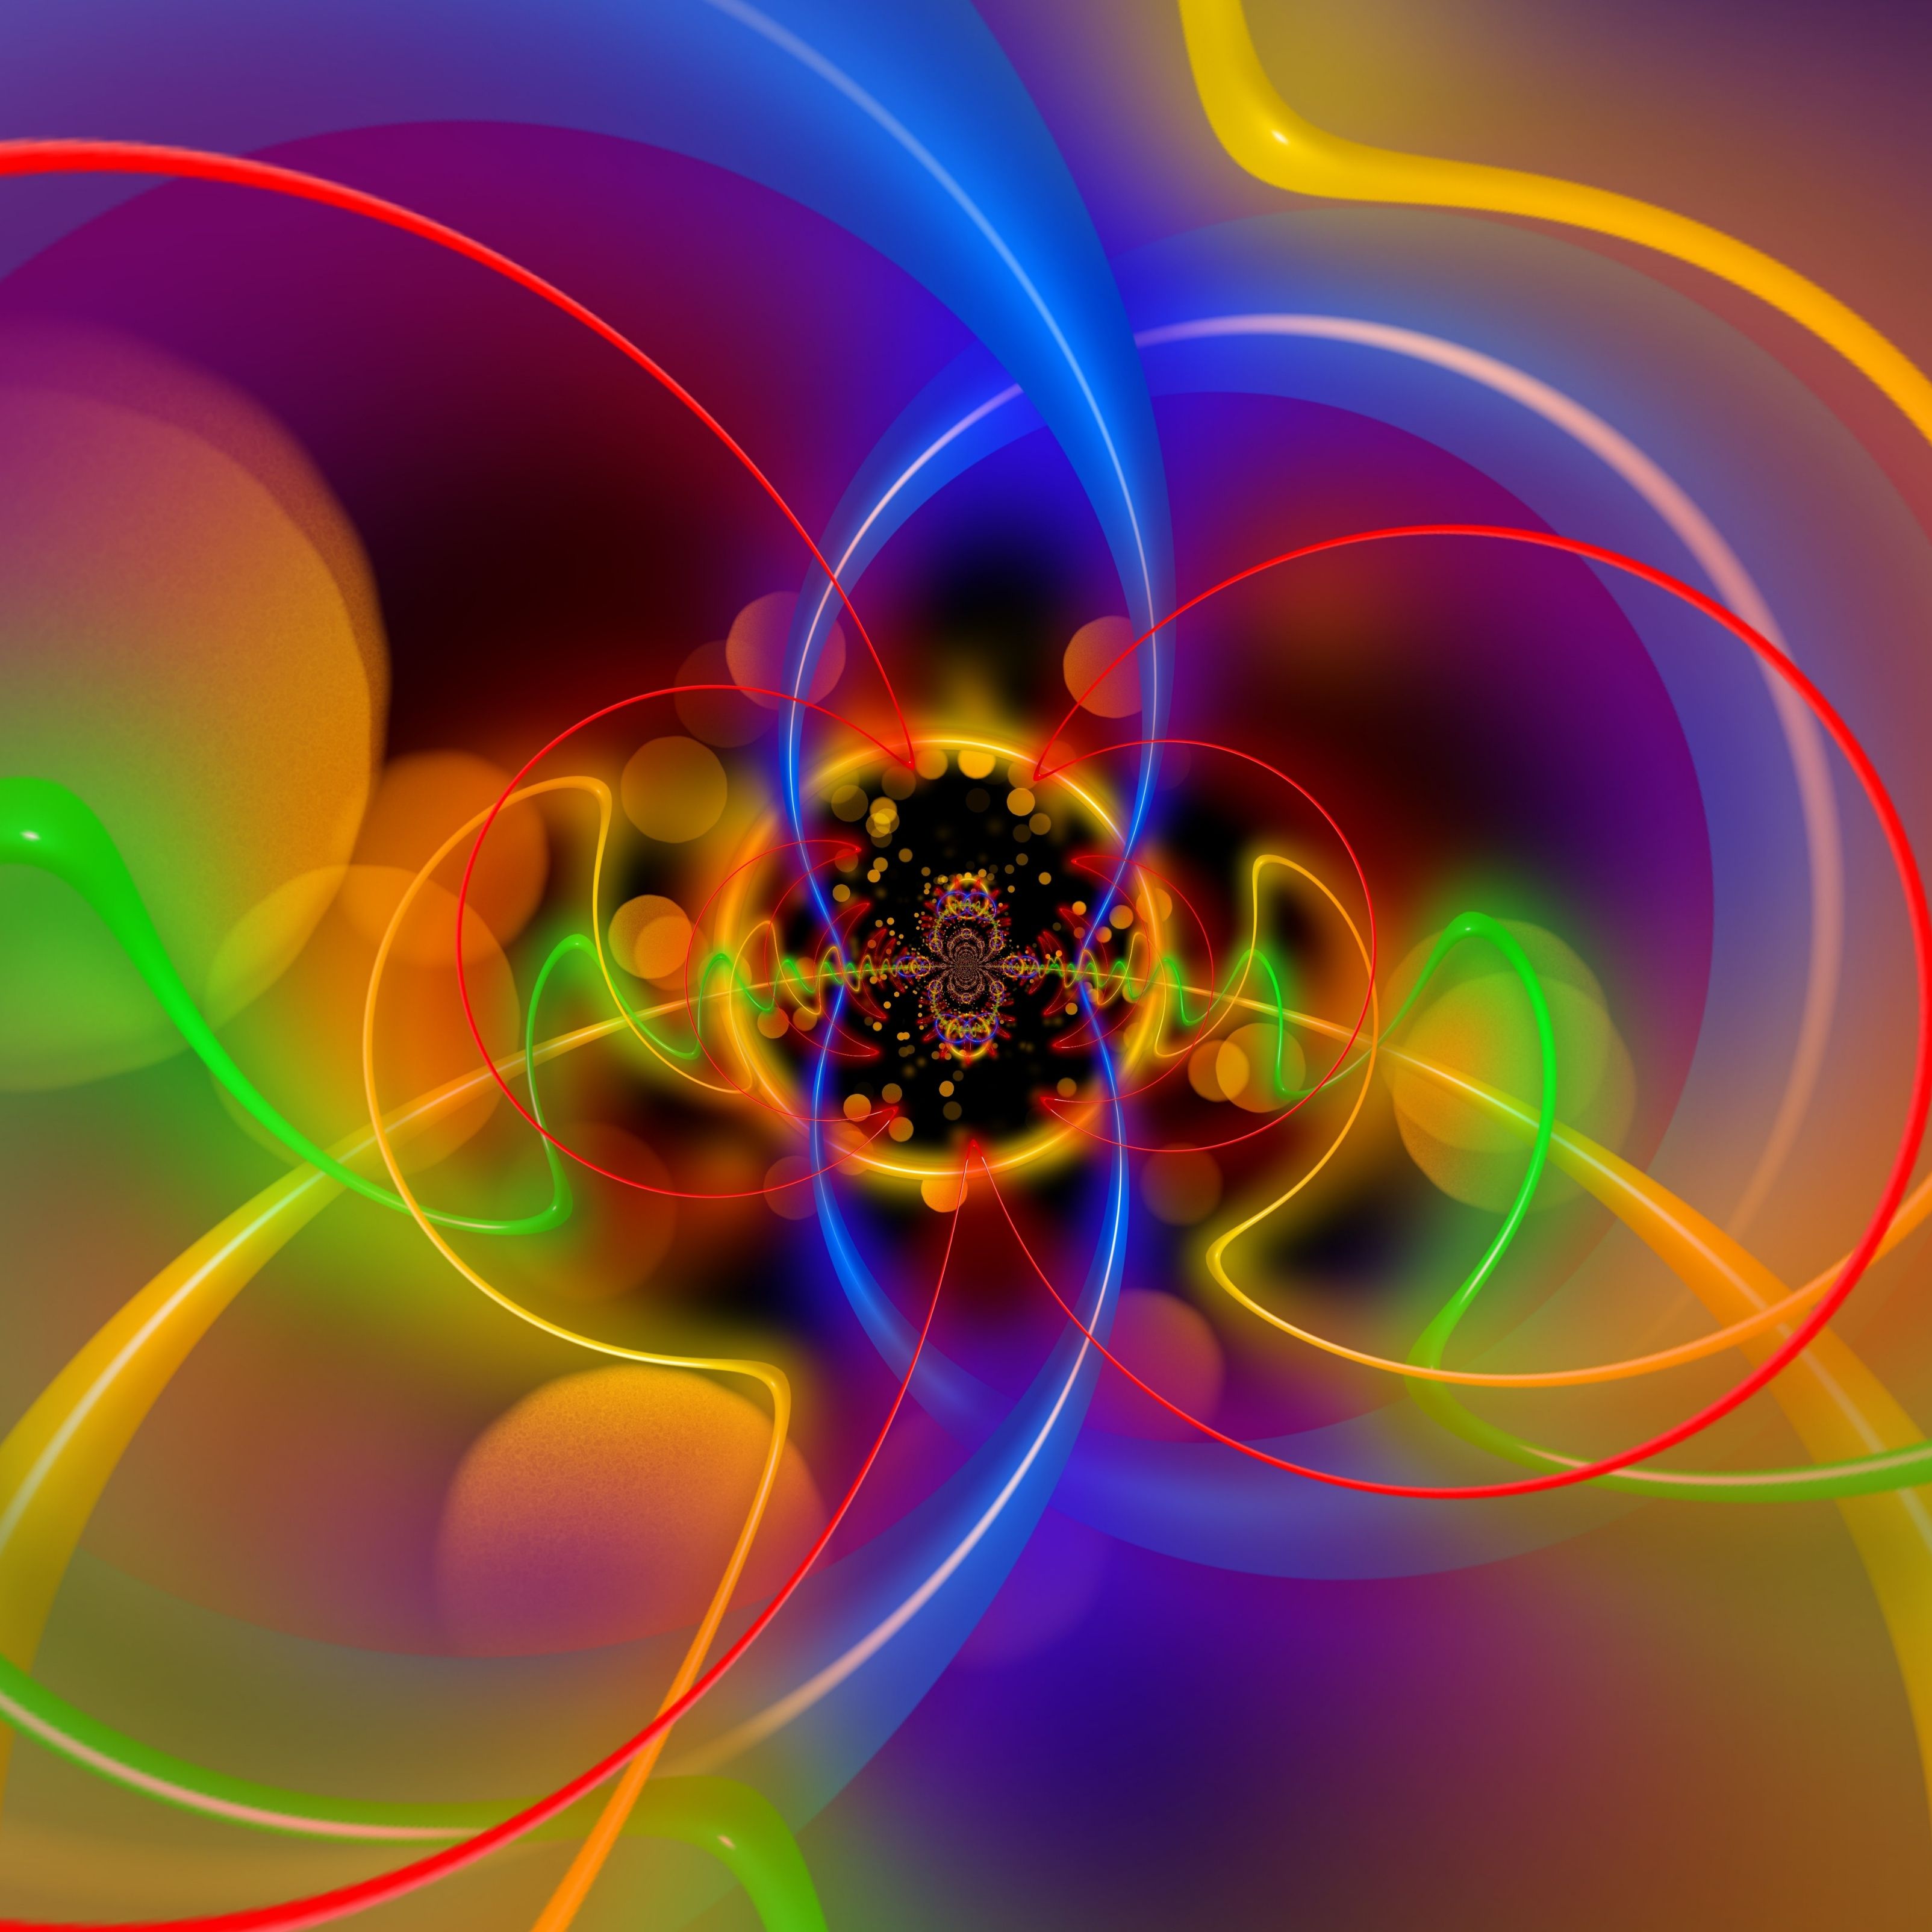 An abstract image with swirling colors and patterns. - Colorful, HD